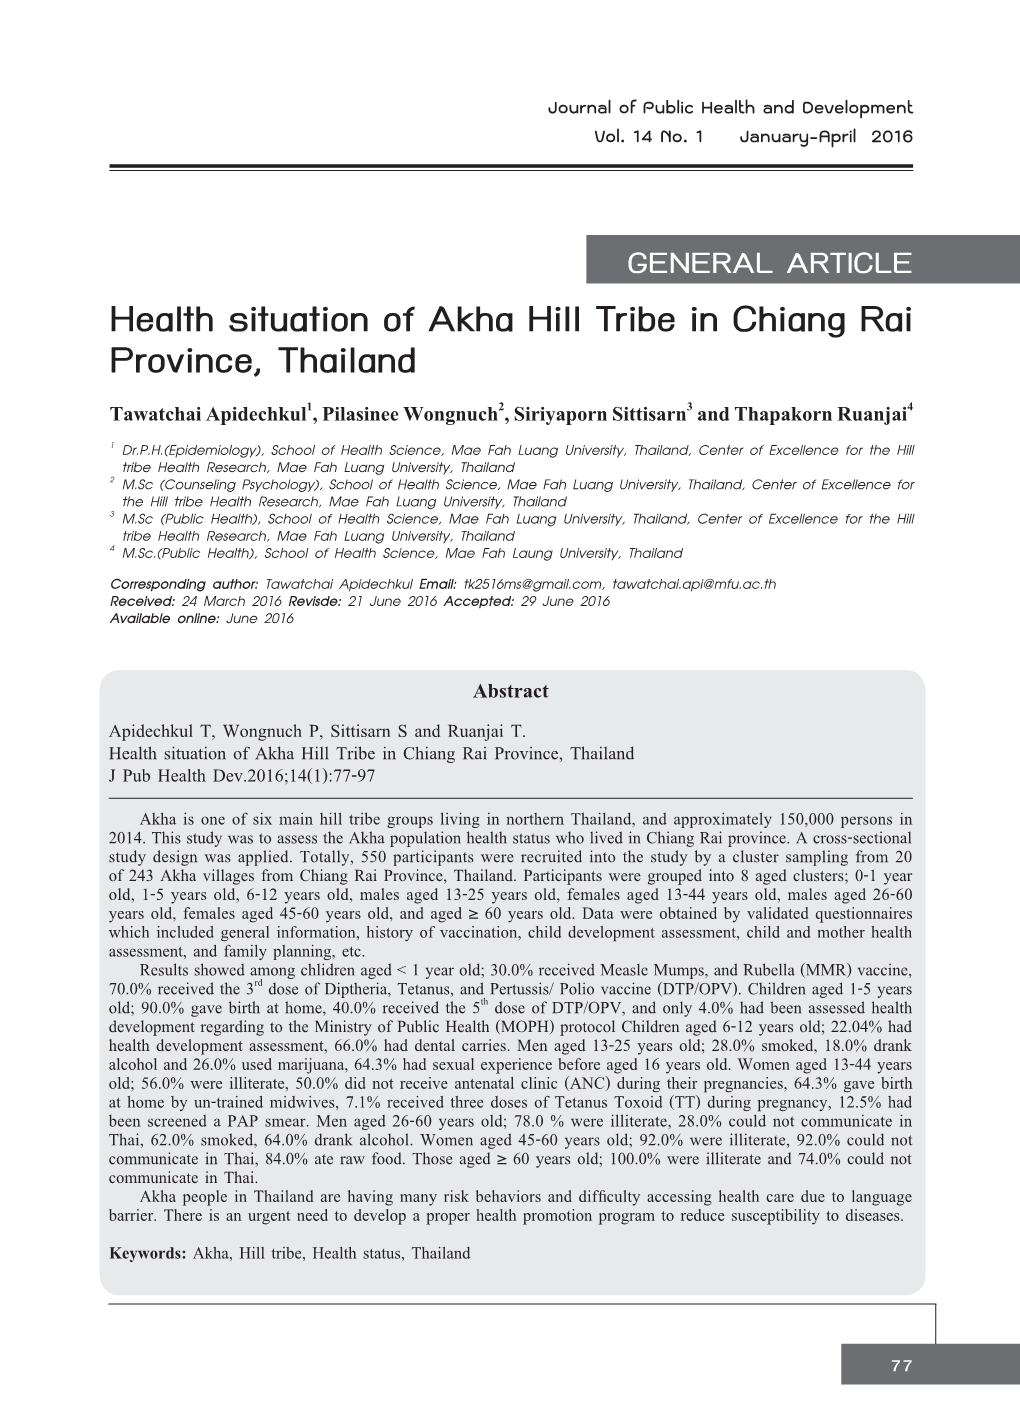 Health Situation of Akha Hill Tribe in Chiang Rai Province, Thailand